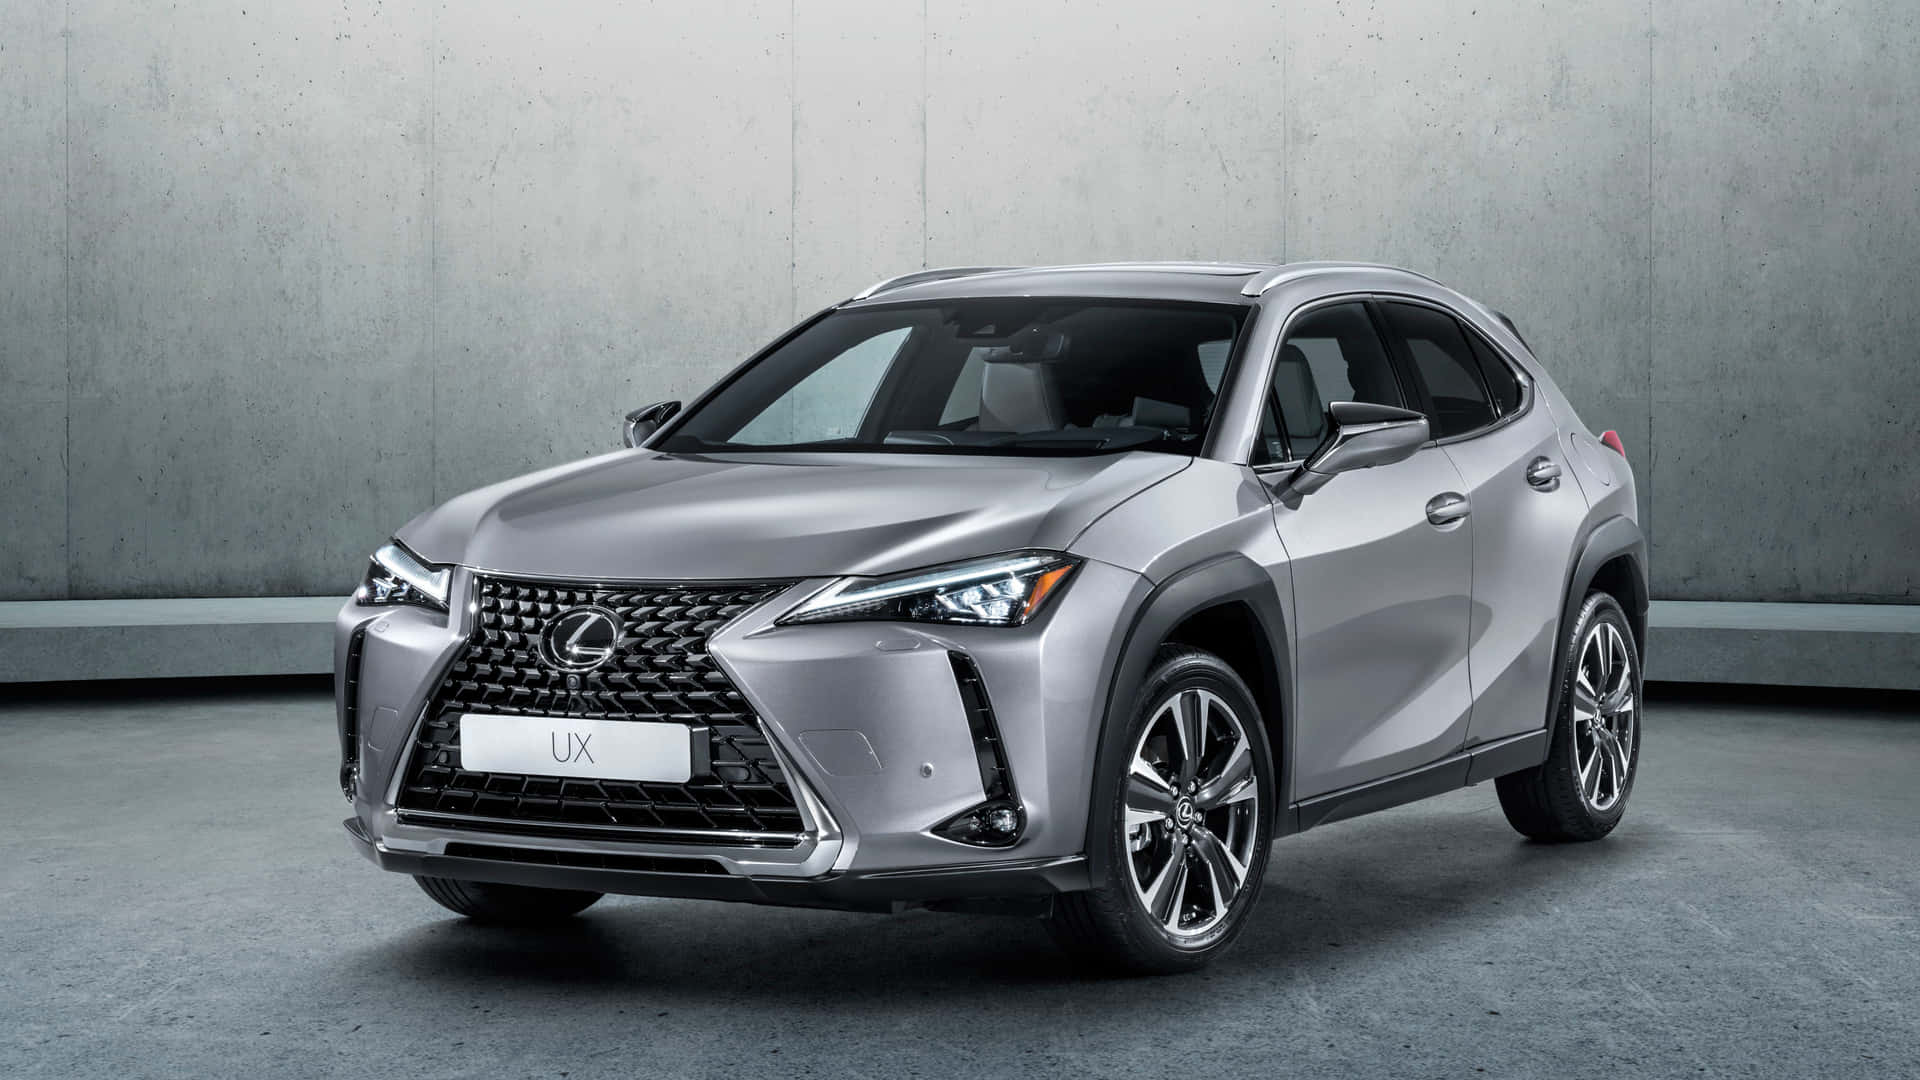 Luxurious Experience With Lexus Ux Suv Wallpaper